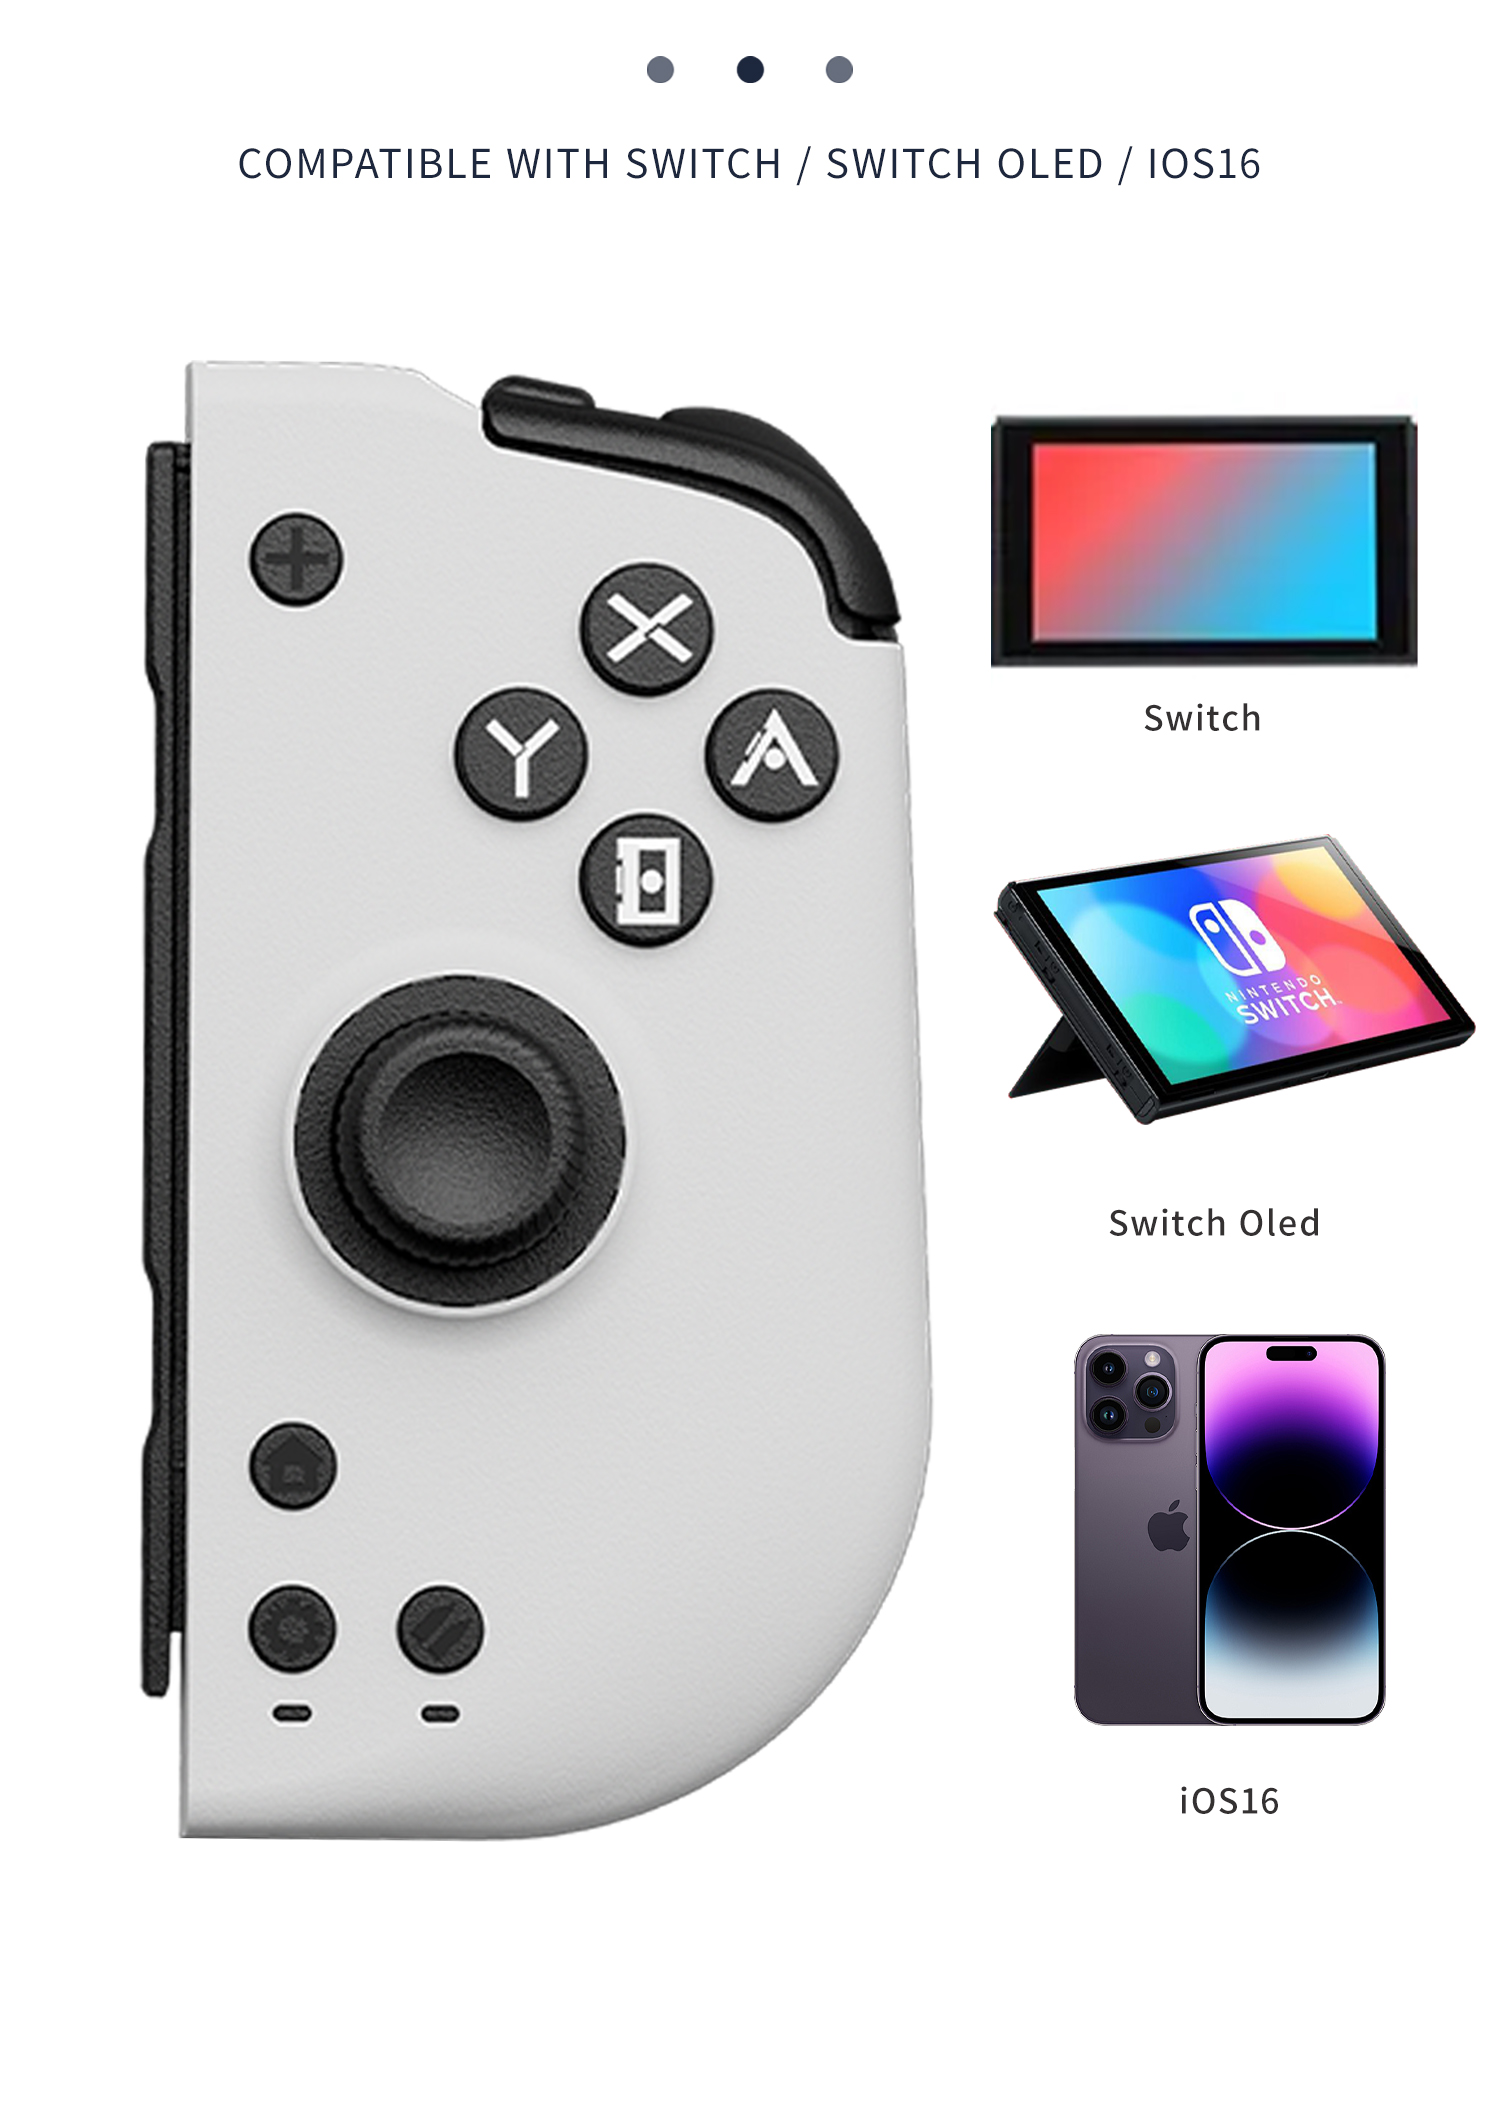 compatible with switch/switch oled/ios16